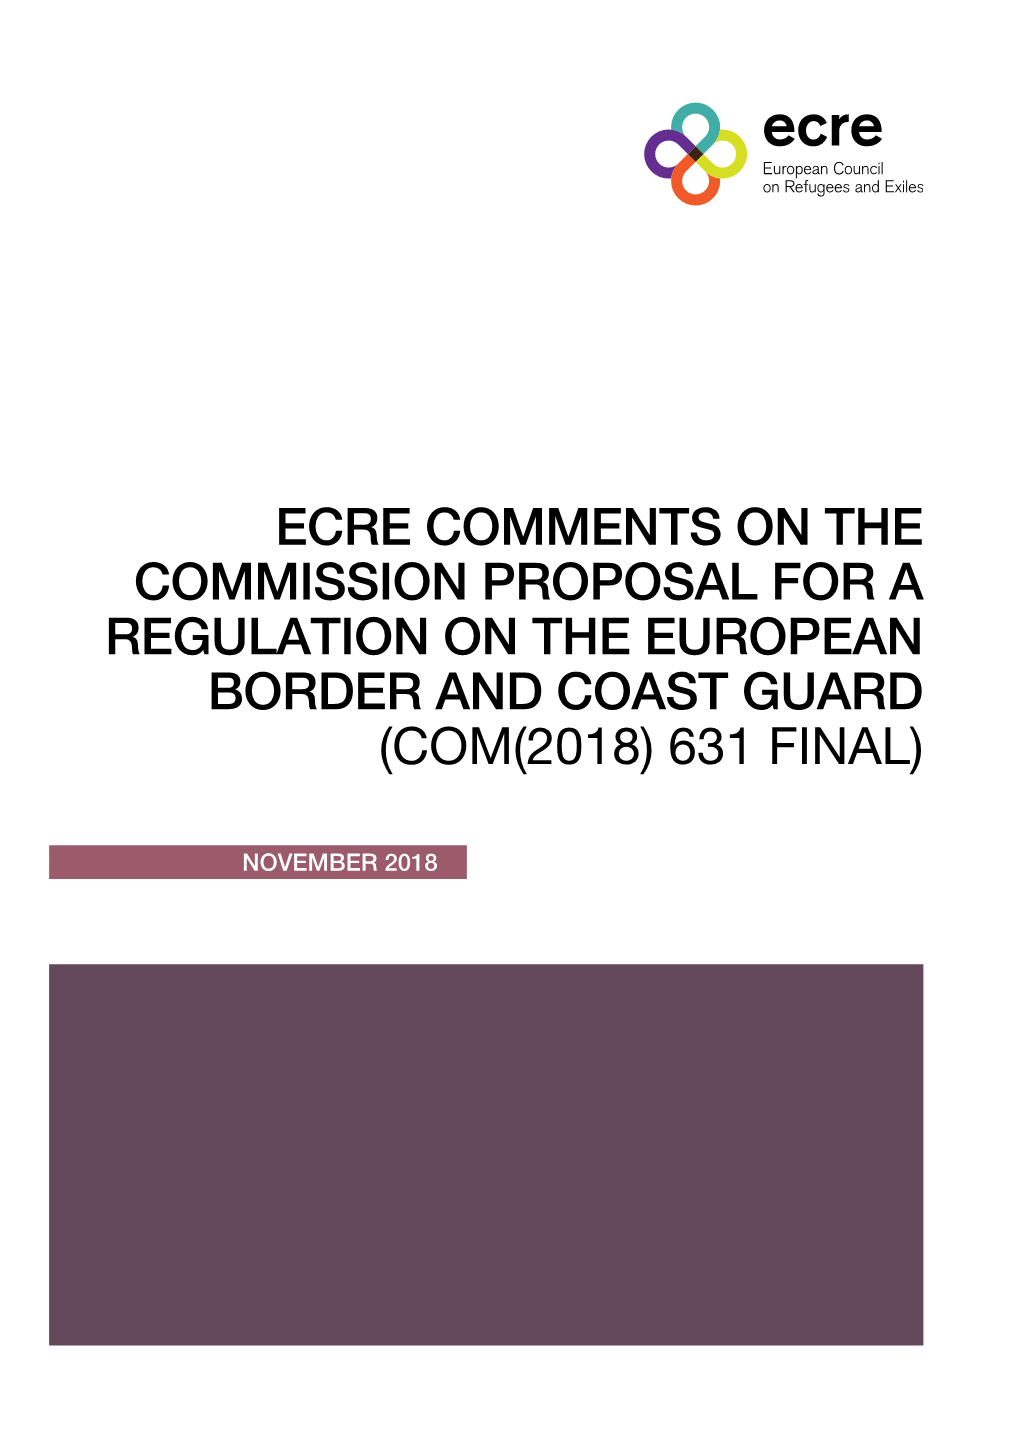 Ecre Comments on the Commission Proposal for a Regulation on the European Border and Coast Guard (Com(2018) 631 Final)